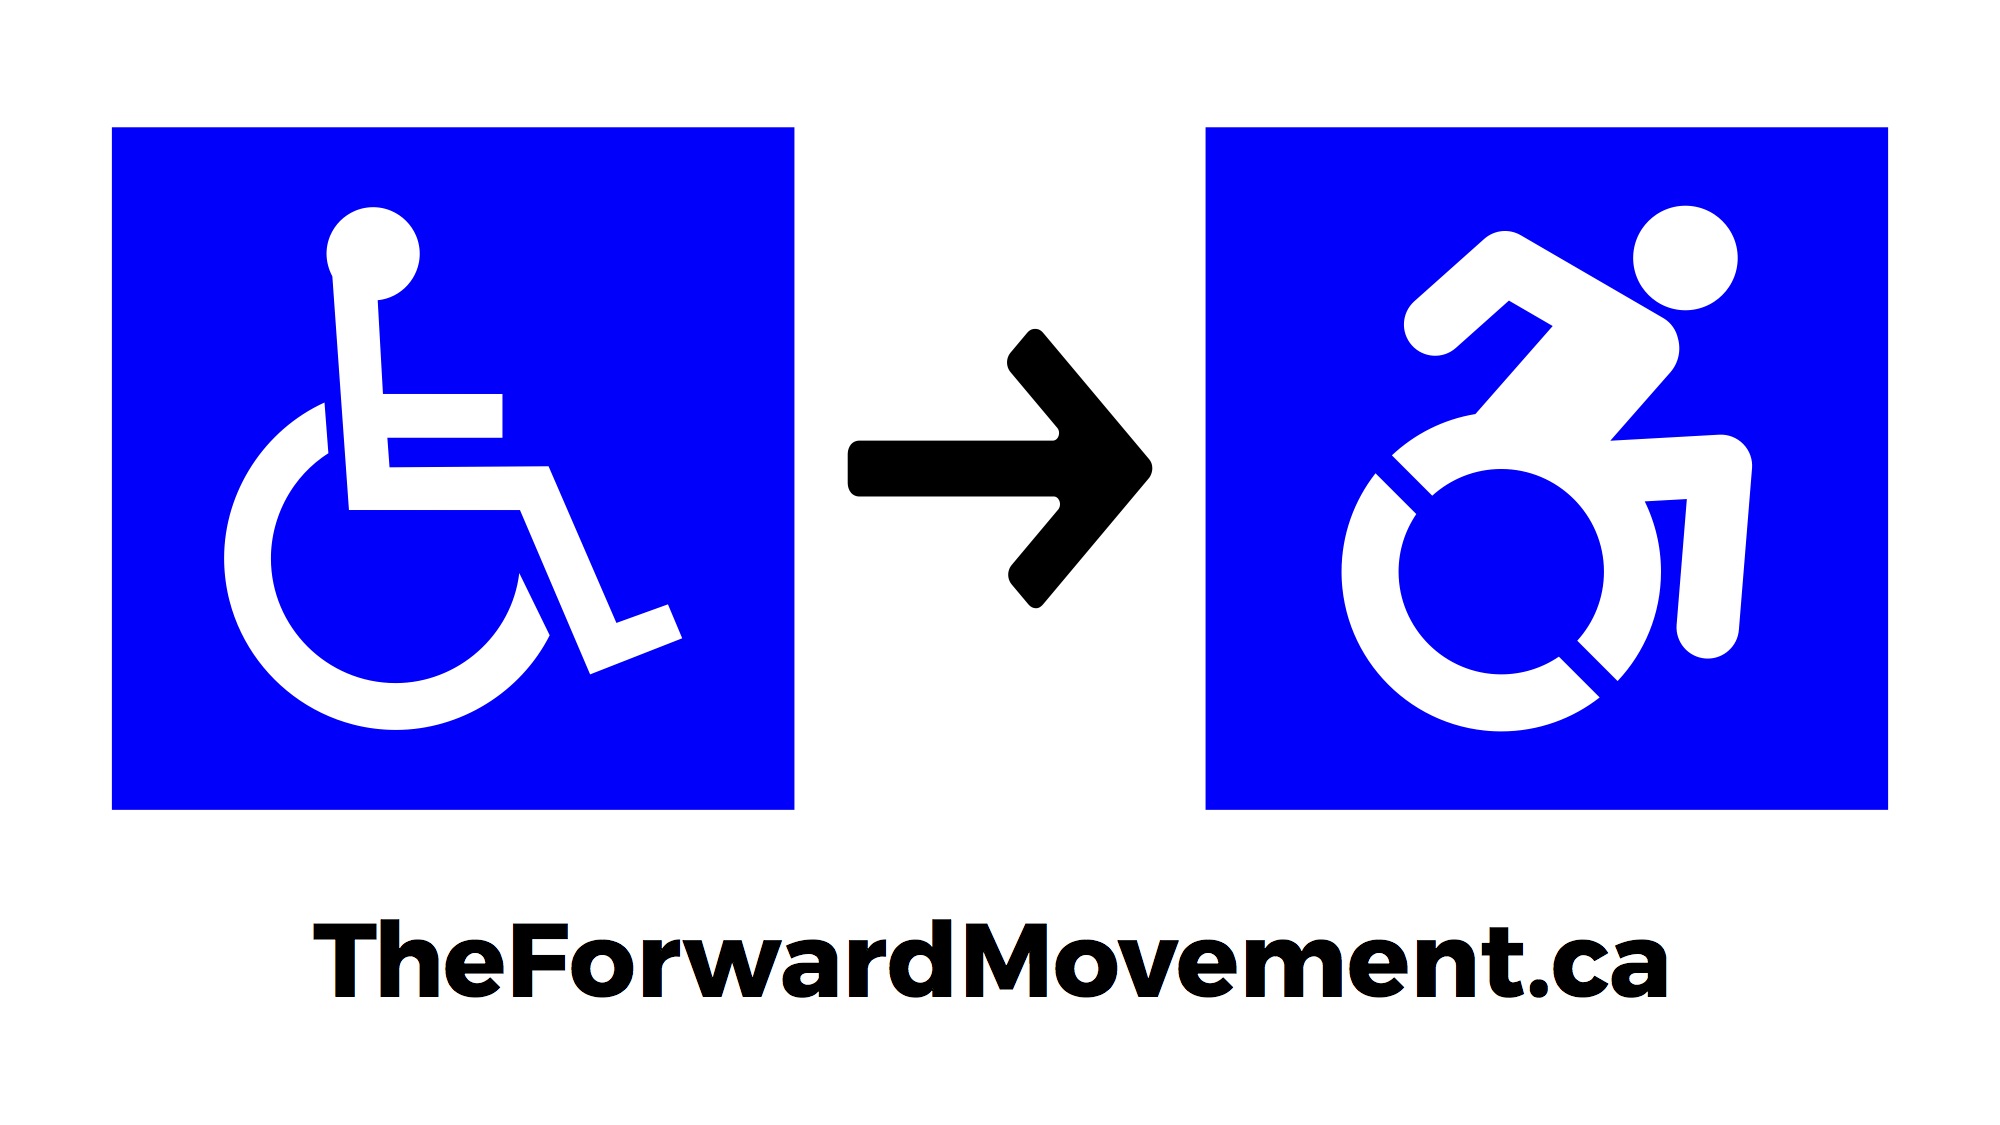 The Forward Movement is an accessibility advocacy and awareness campaign working to bring the Dynamic Symbol of Access to Ontario and Canada to promote the physical and social inclusion for people of ALL abilities.